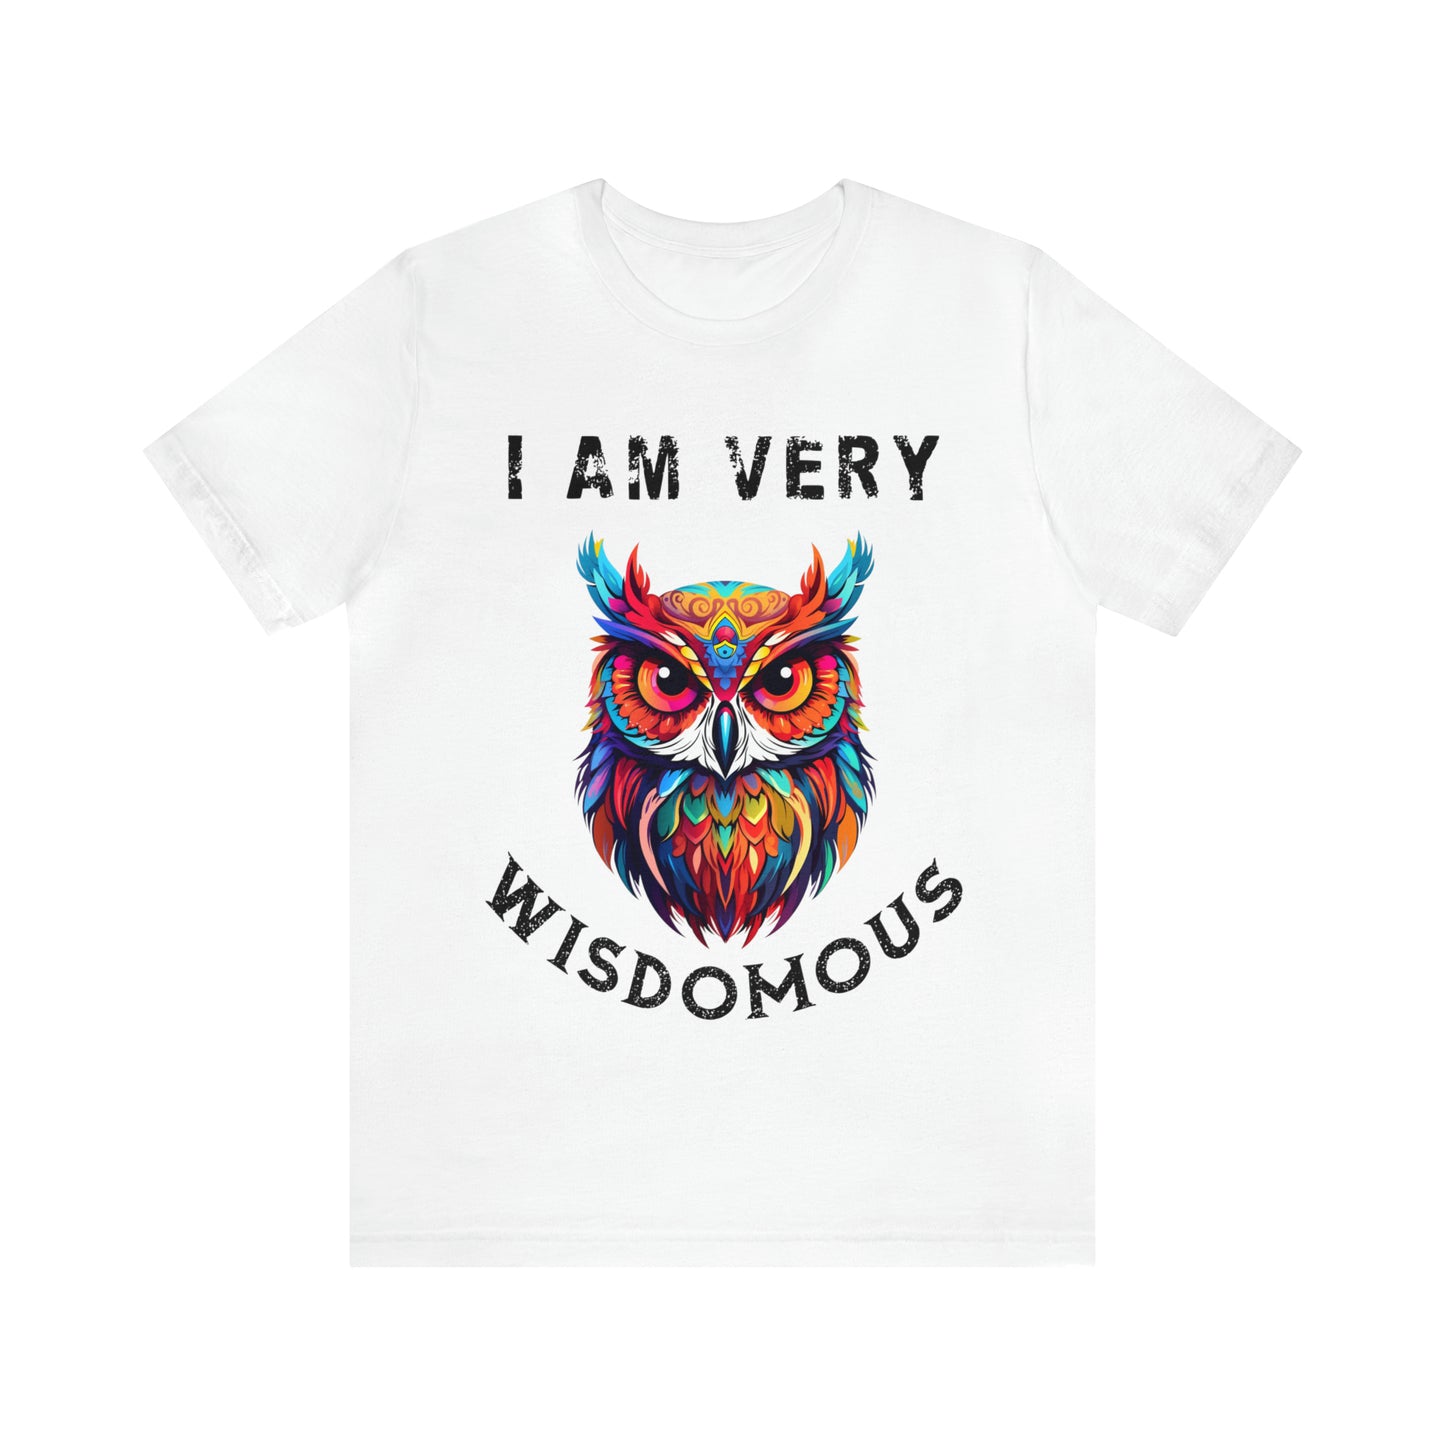 Men's T-Shirt, I Am Very Wisdomous, funny T-shirt, Gift for Dad, Husband Gift, Owl T-Shirt, Father's Day Gift